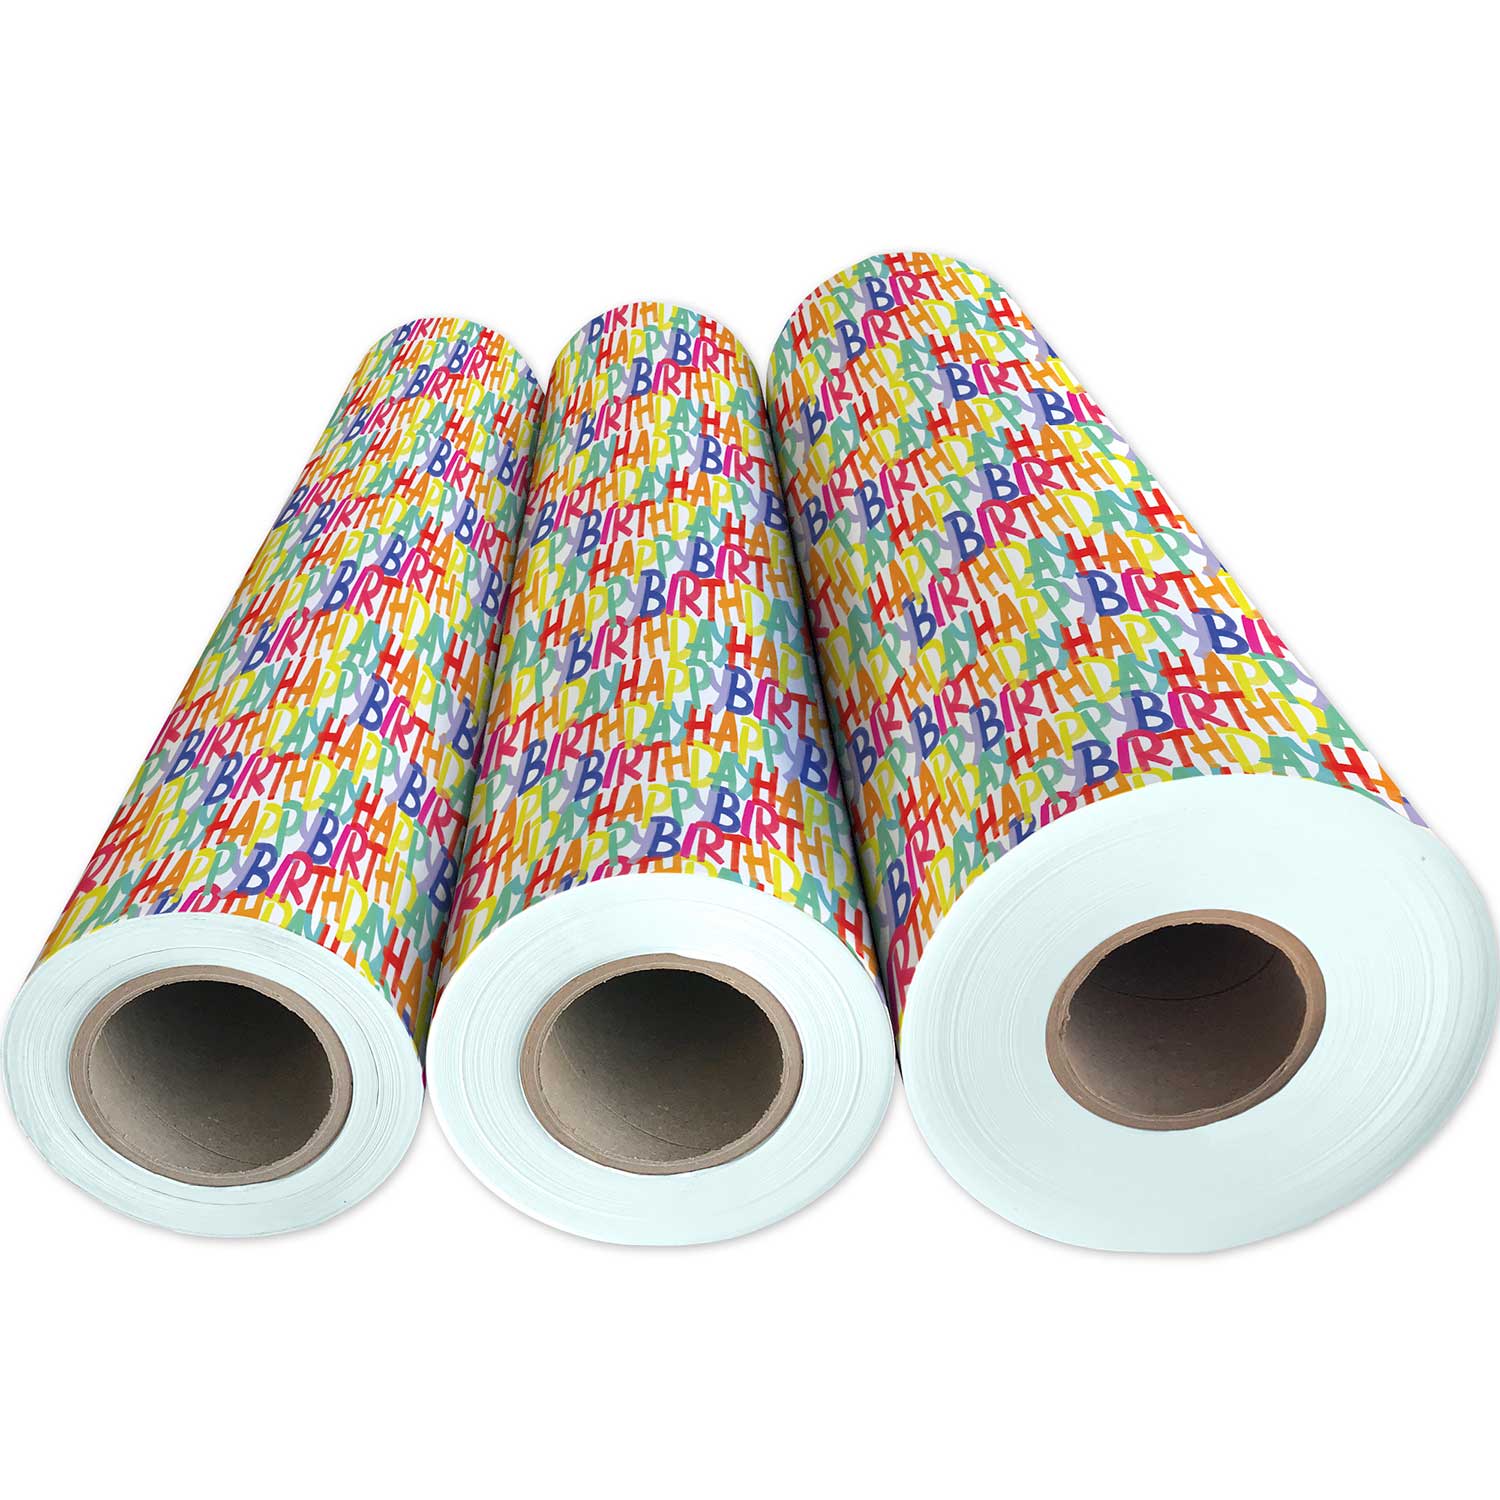 New Love Rainbow Wrapping Paper, Mother's Day Gift Paper, Birthday